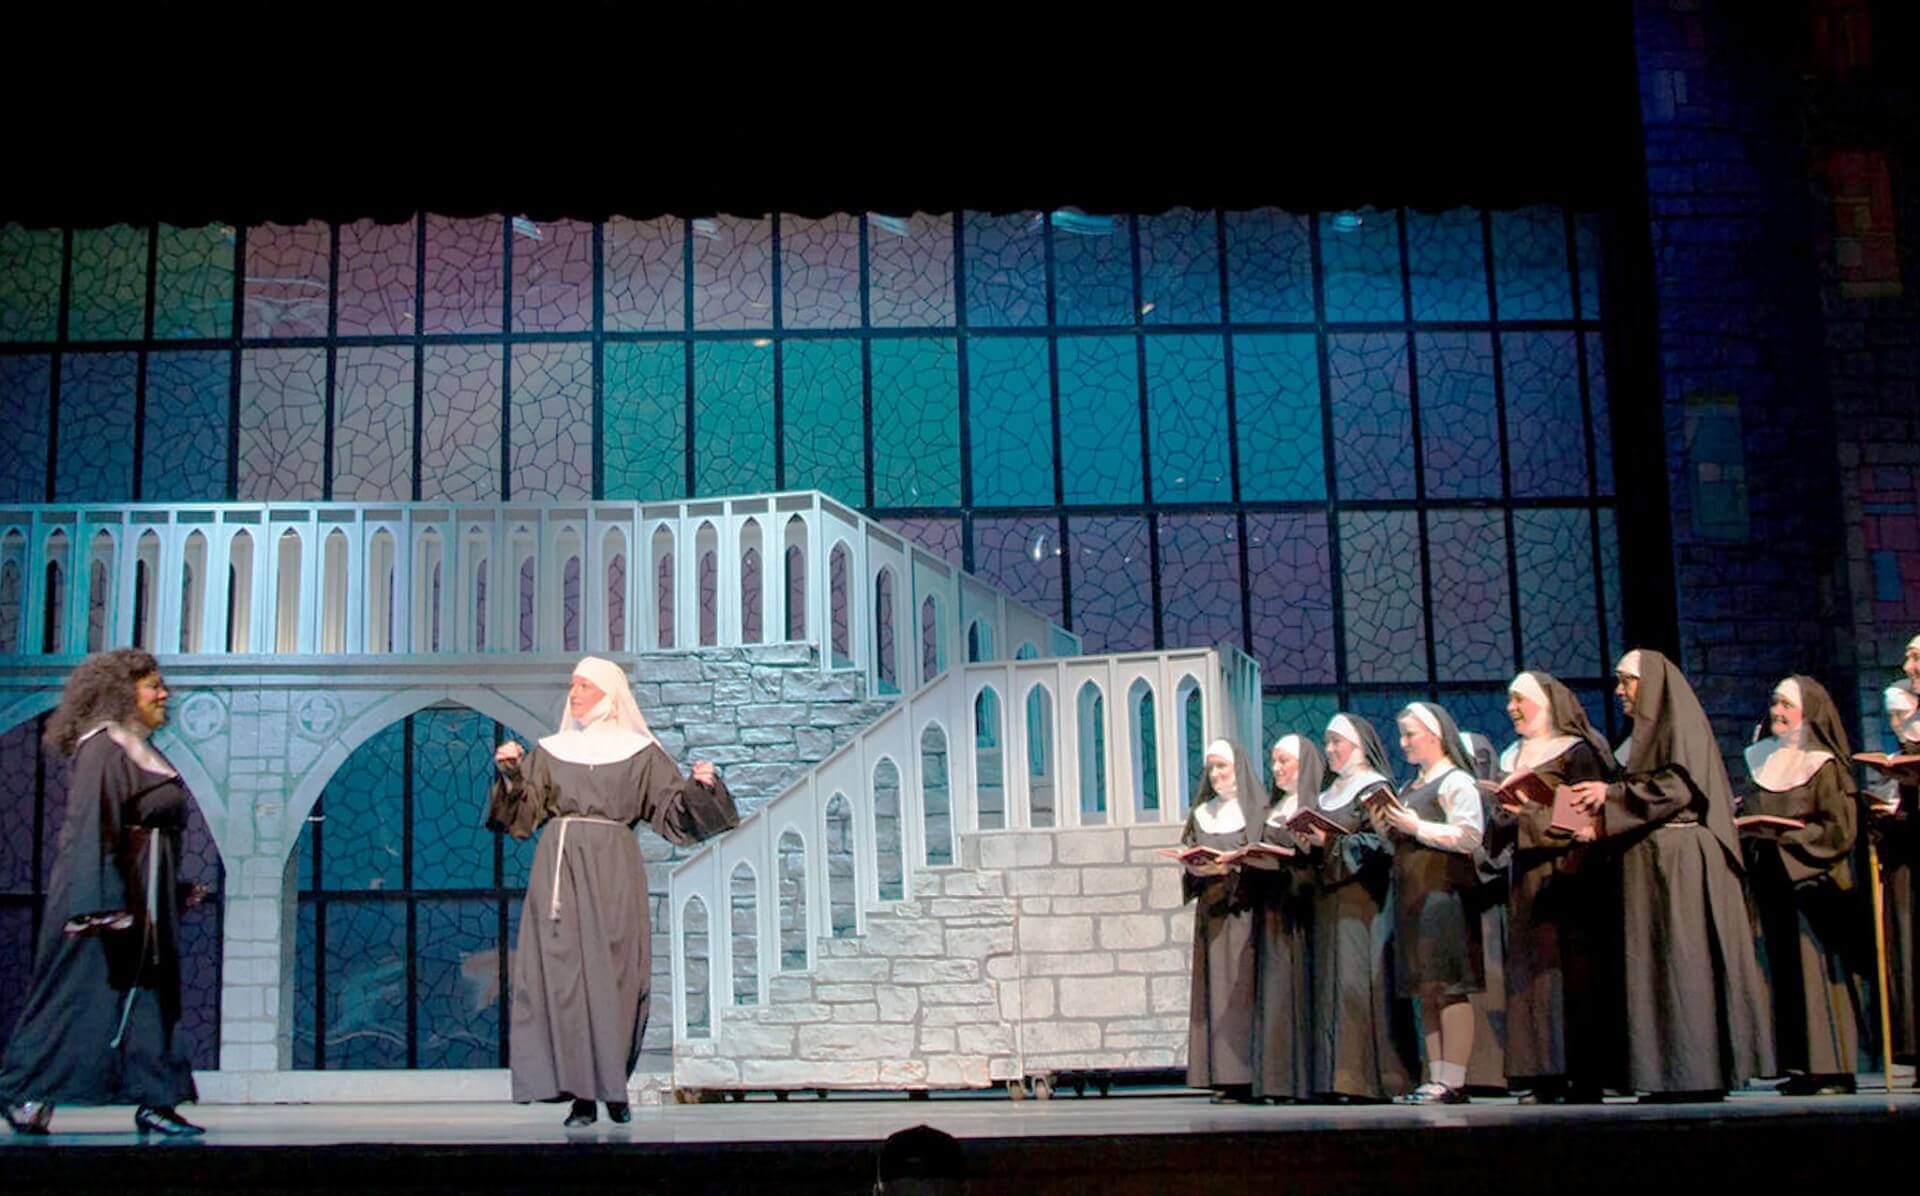 Pablo Costume - Sister Act Costume Rental pictures - Stagecraft Theatrical